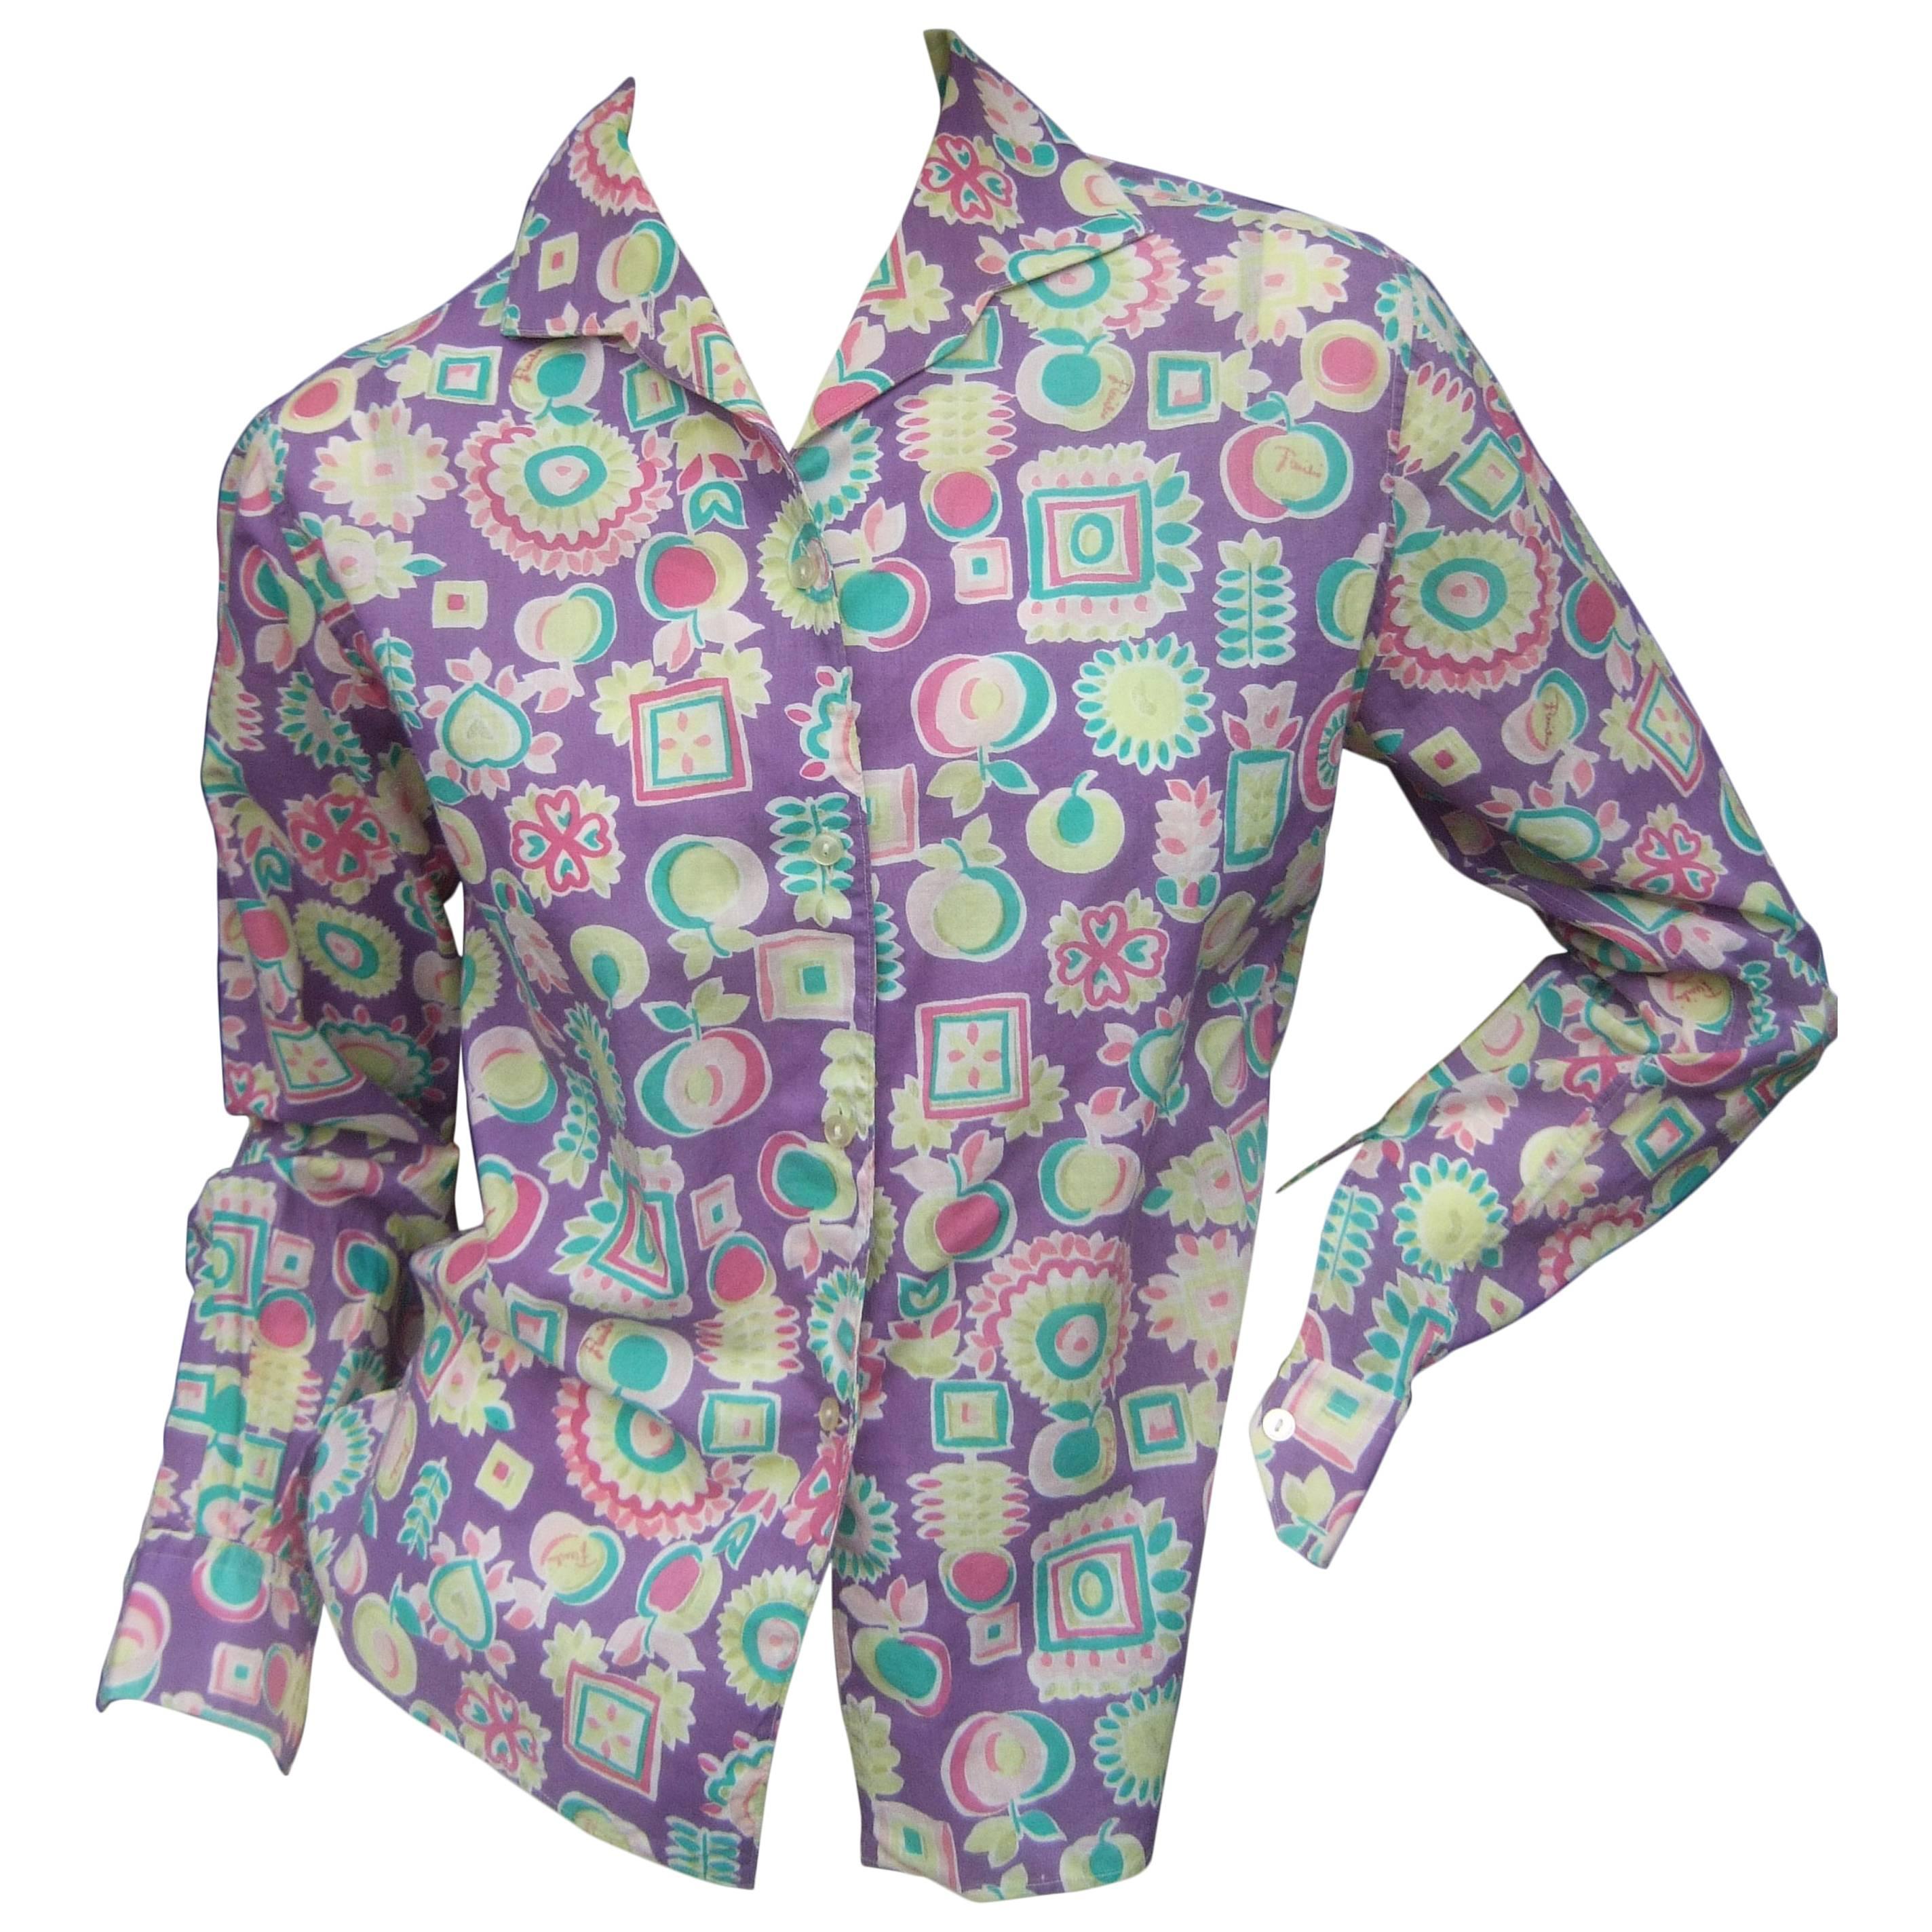 Emilio Pucci Cotton Pastel Print Blouse Made in Italy c 1970